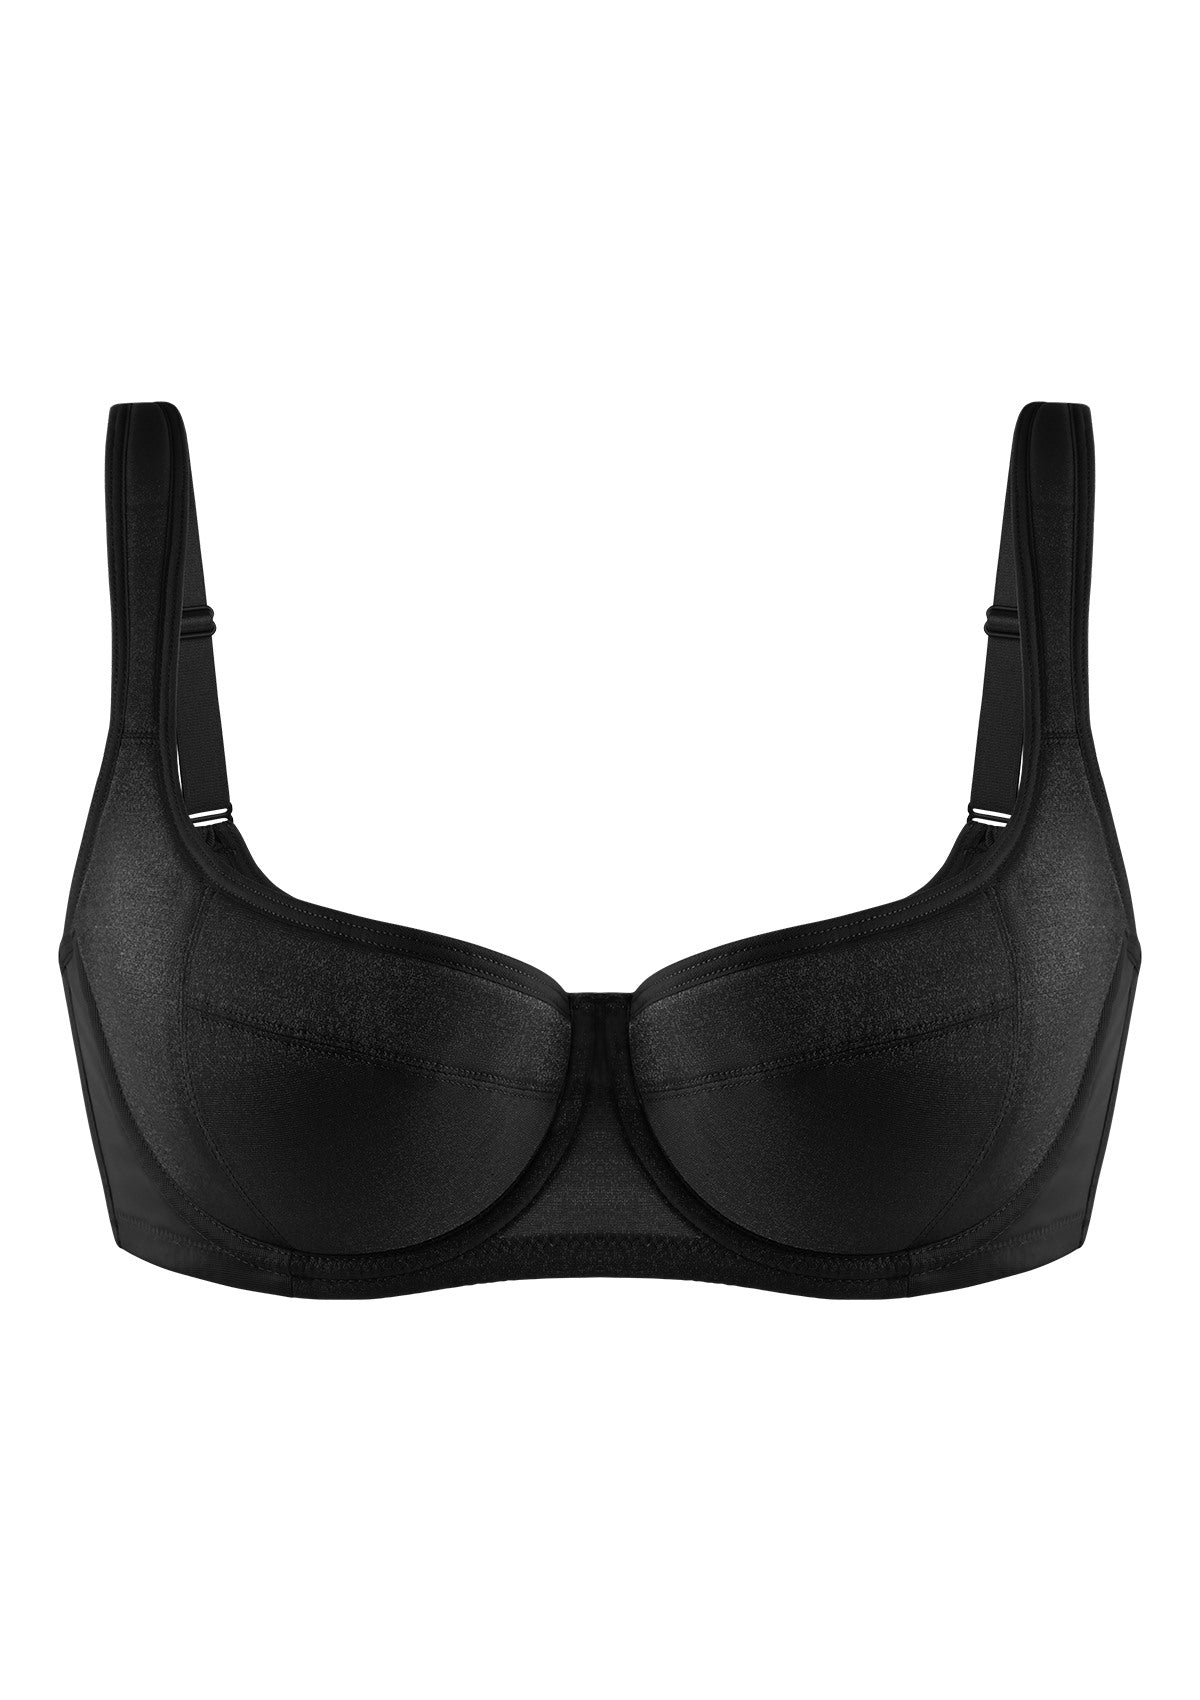 Rosme Womens Balconette Bra with Padded Straps, Collection Sophisticated